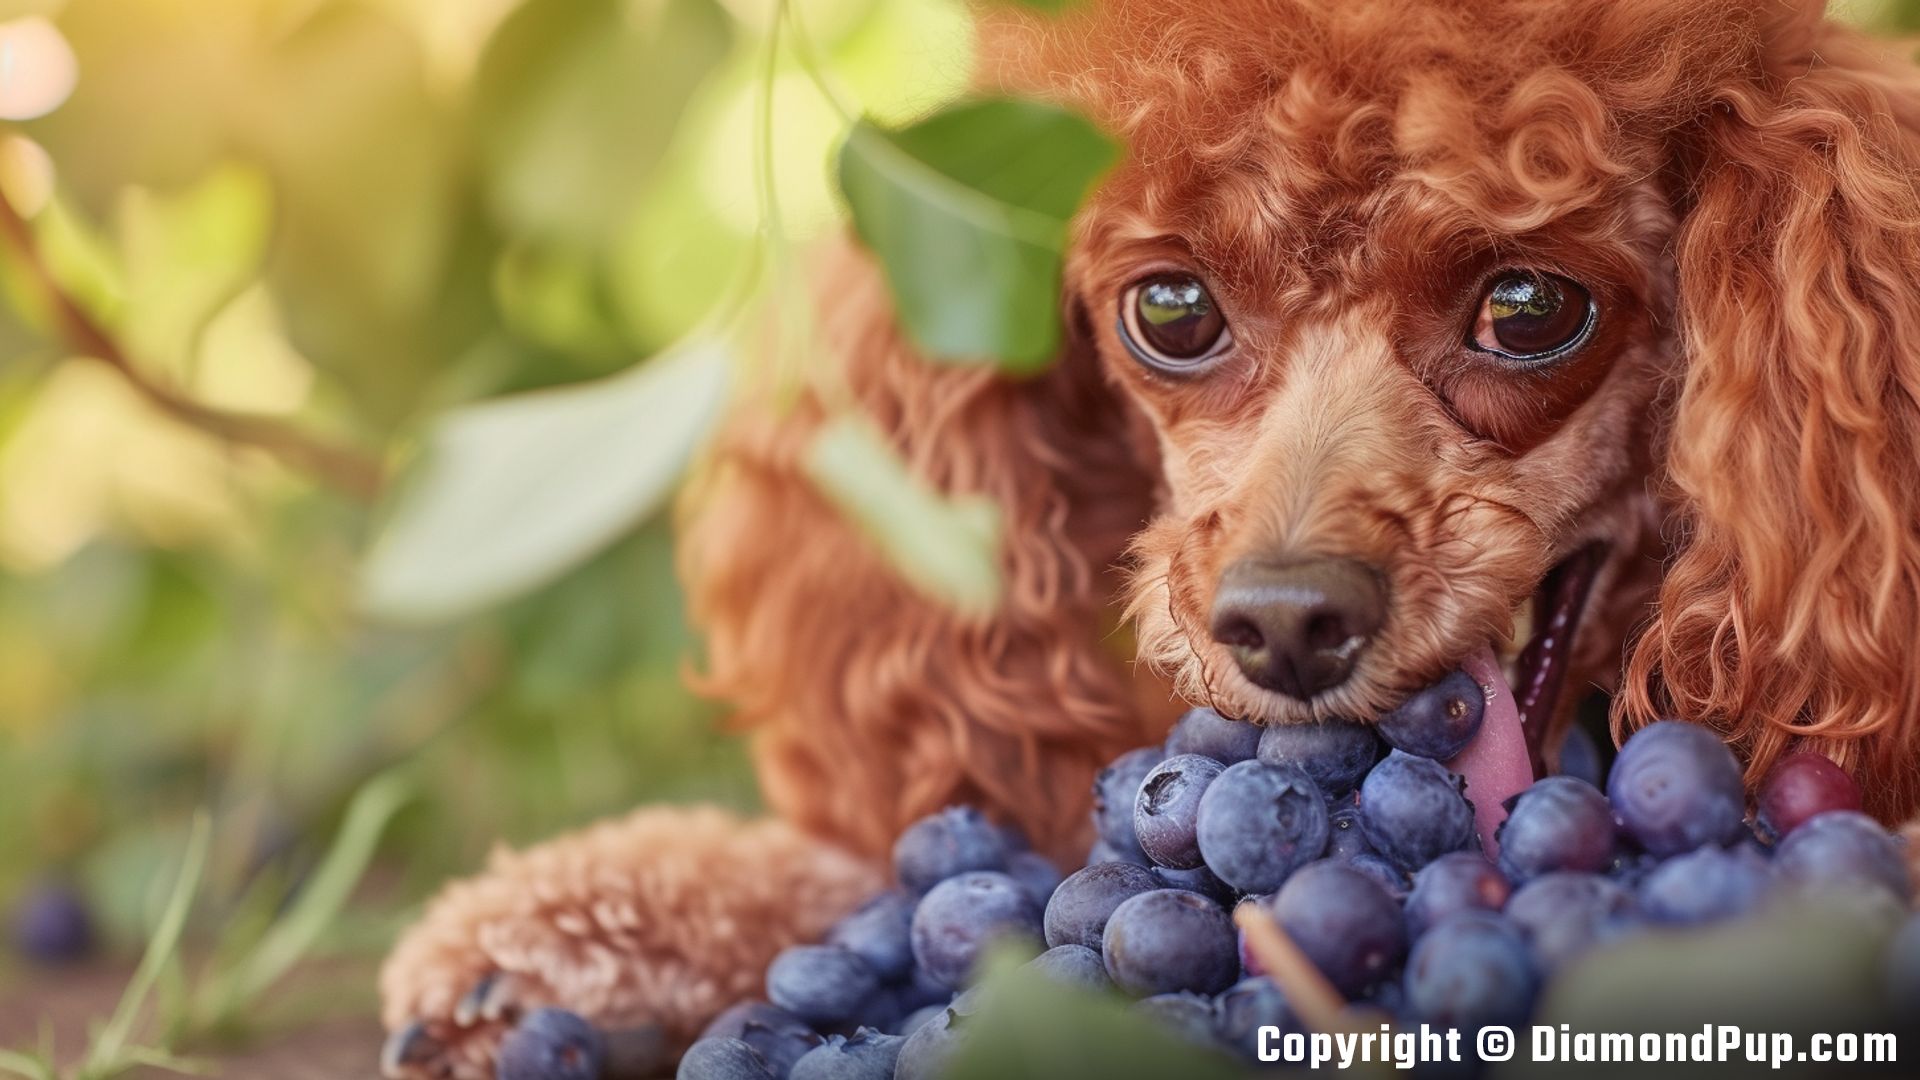 Photo of a Playful Poodle Snacking on Blueberries